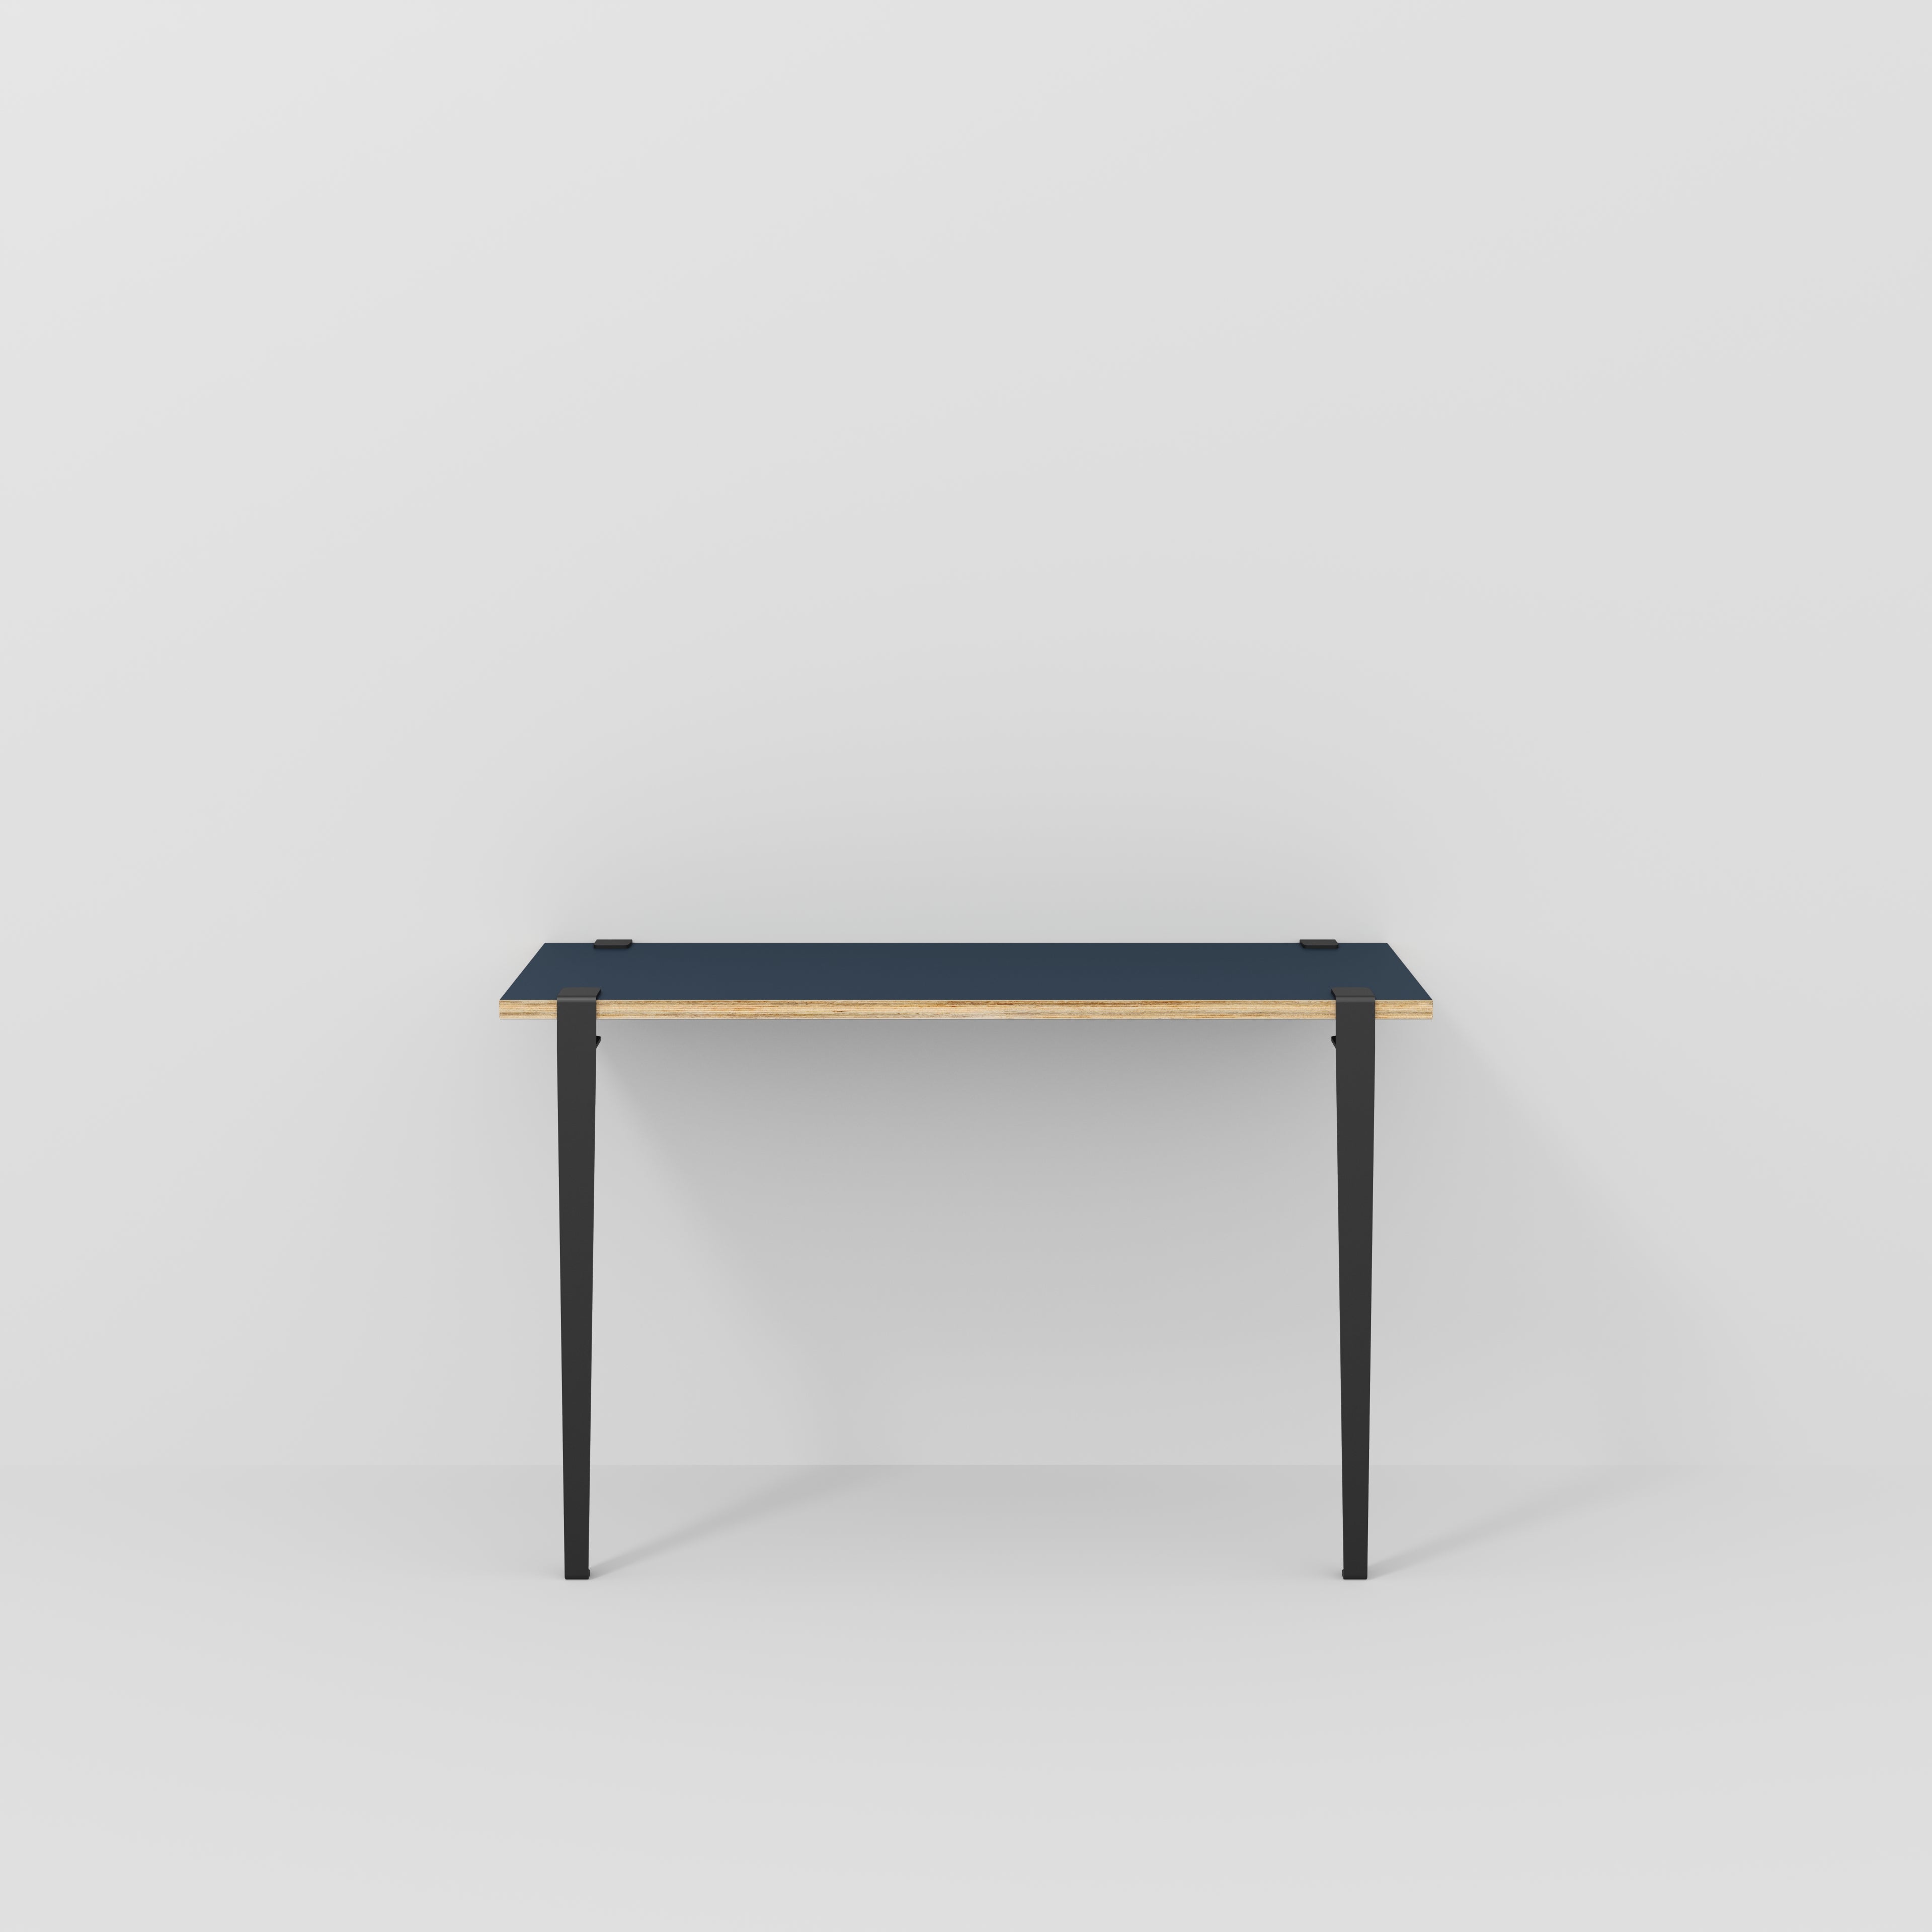 Wall Desk with Black Tiptoe Legs and Brackets - Formica Night Sea Blue - 1200(w) x 400(d) x 750(h)